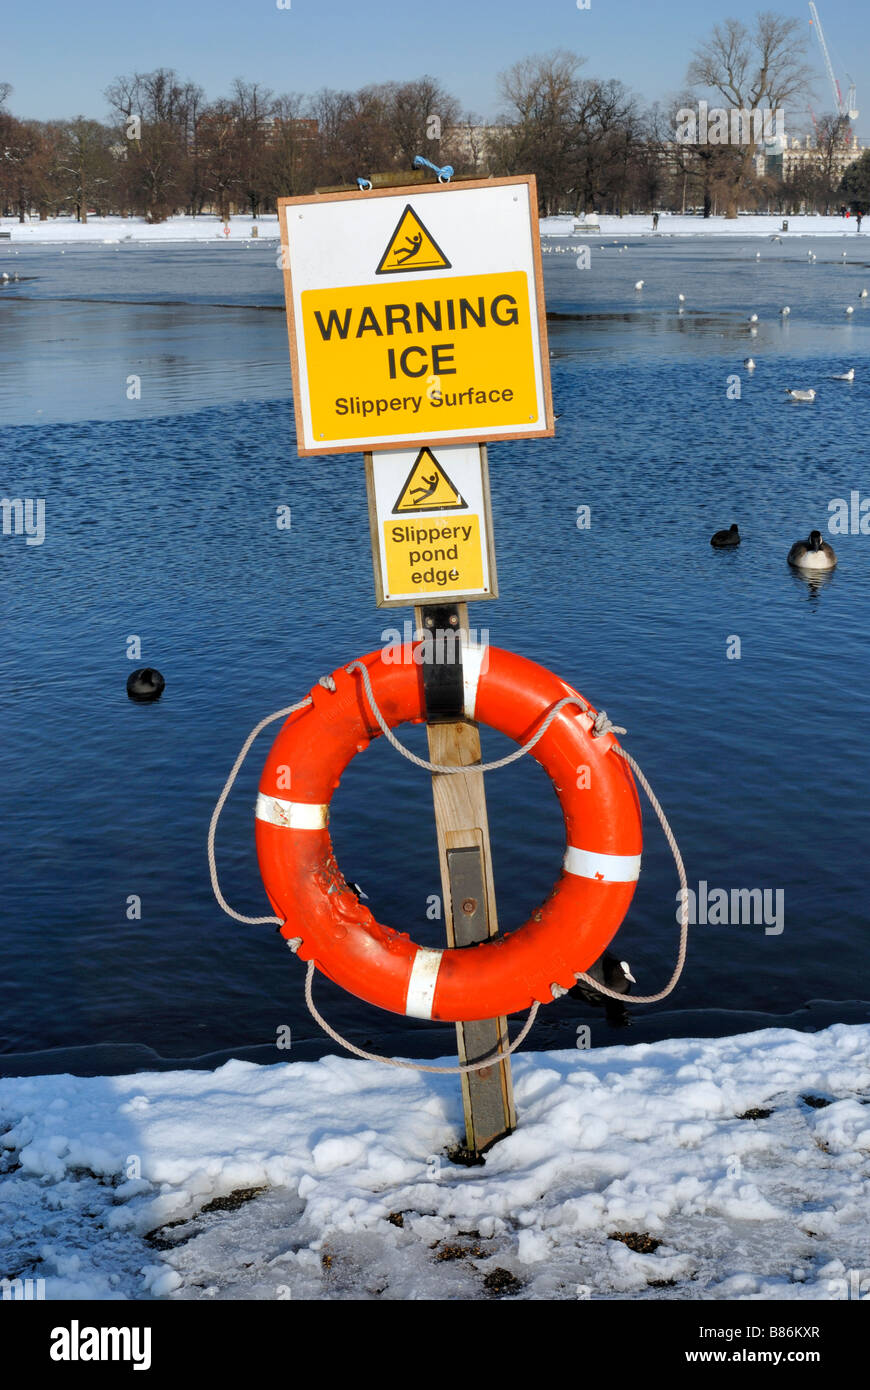 Warning sign for ice on frozen lake Stock Photo